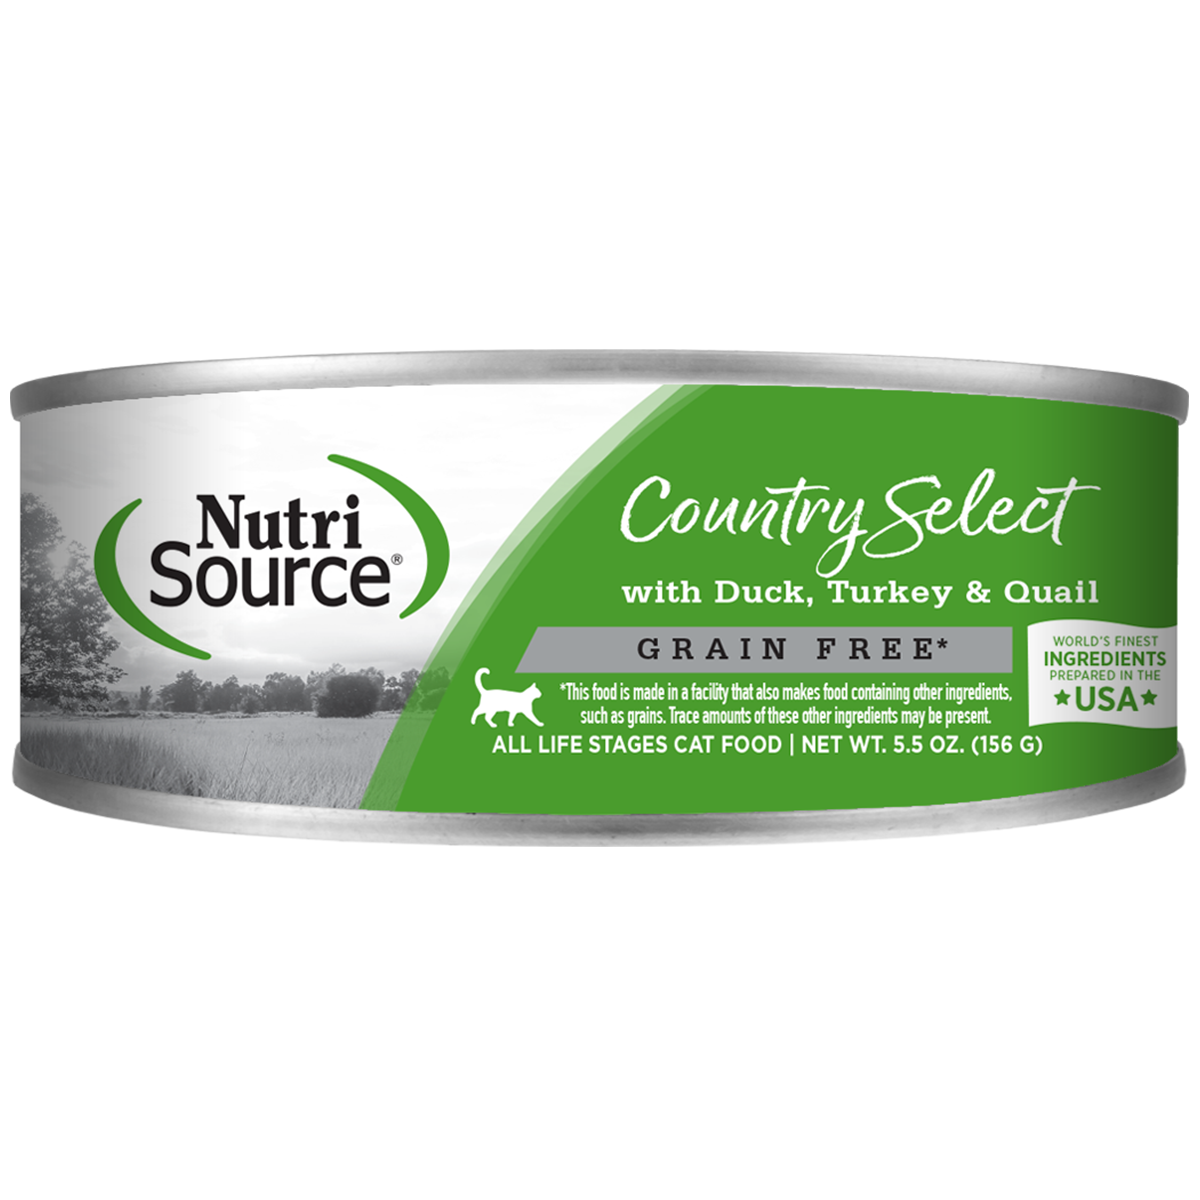 NutriSource Grain Free Wet Cat Food - Country Select